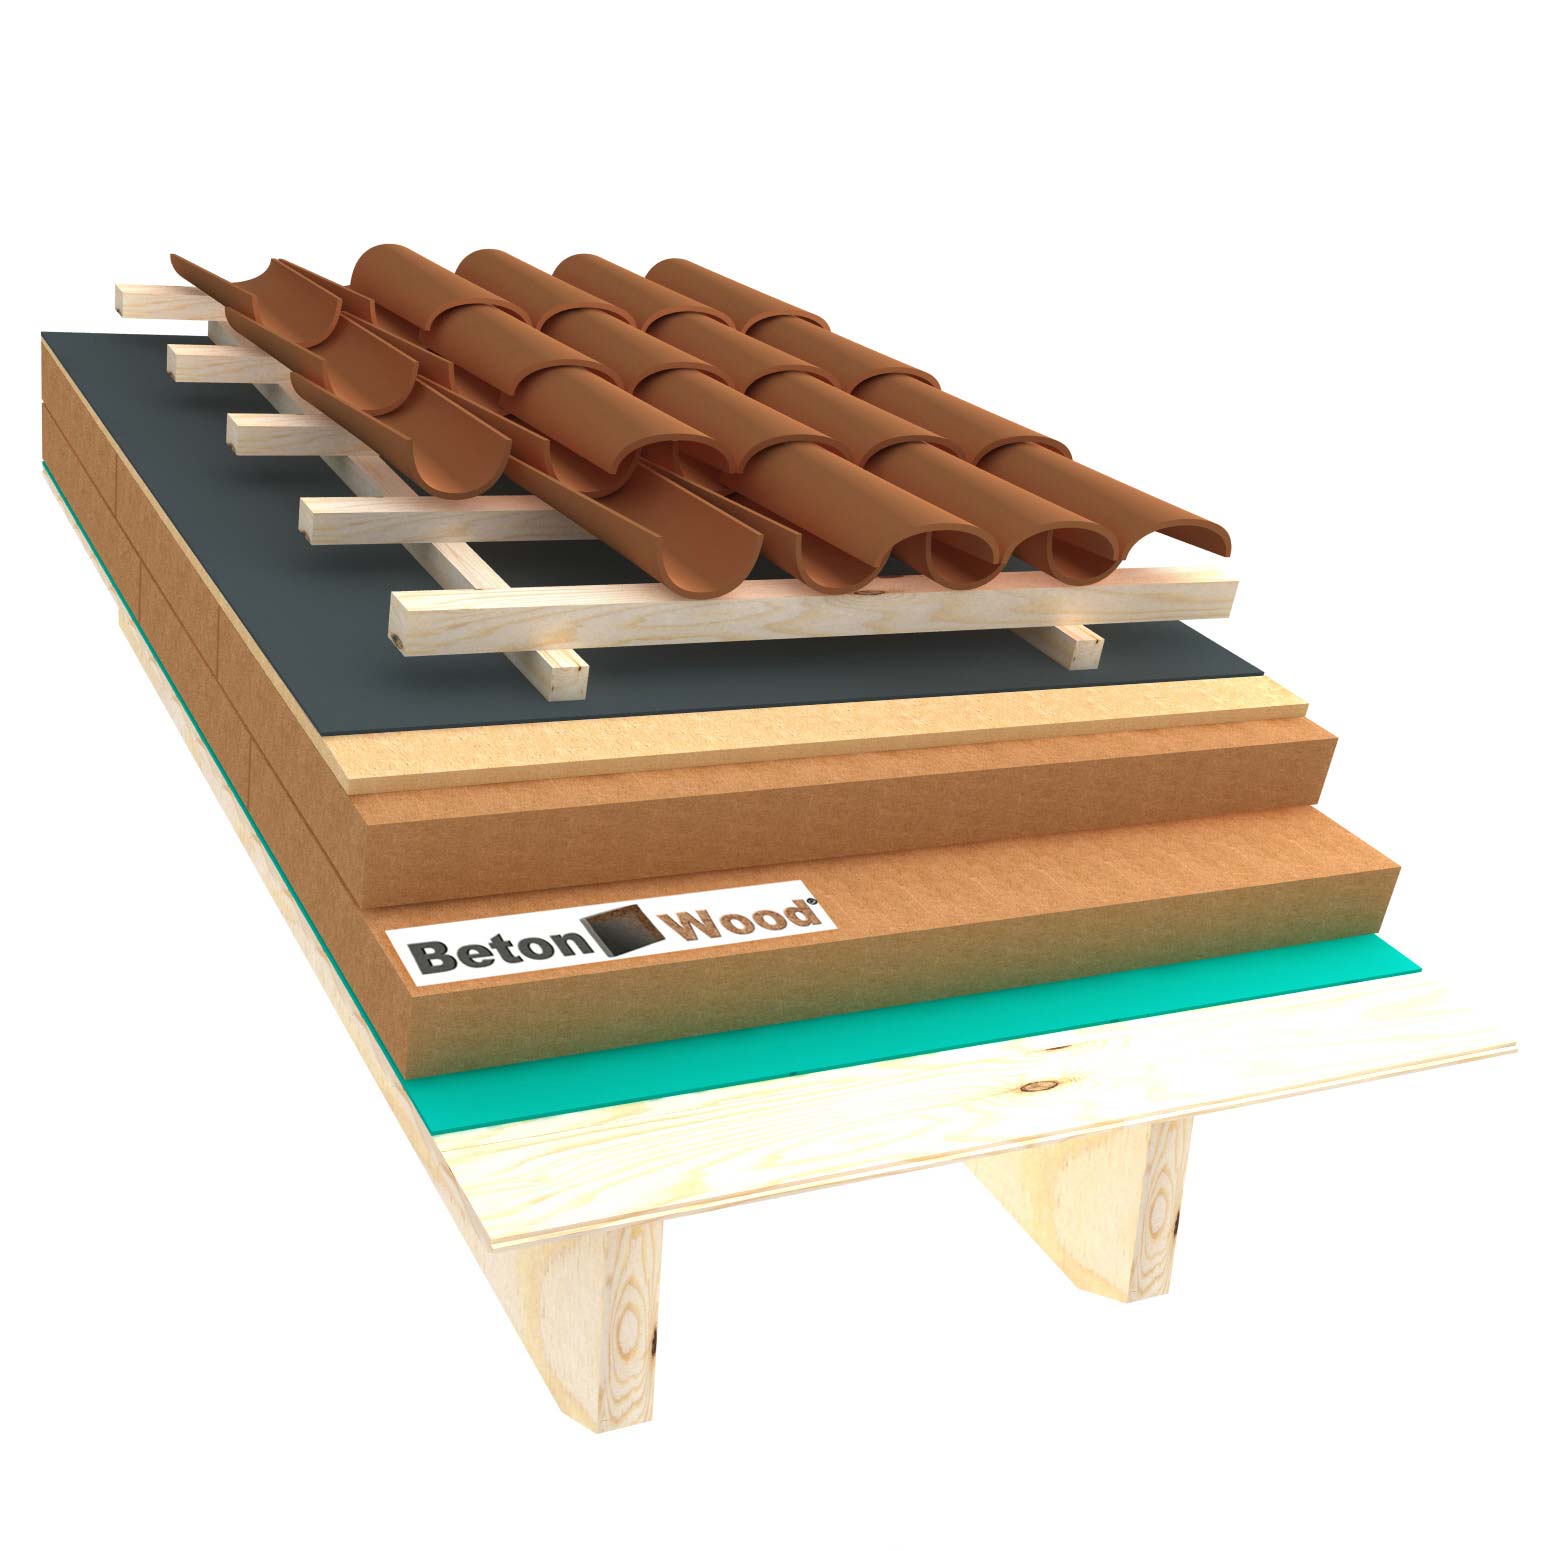 Ventilated roof with fiber wood Isorel and Therm SD on matchboarding